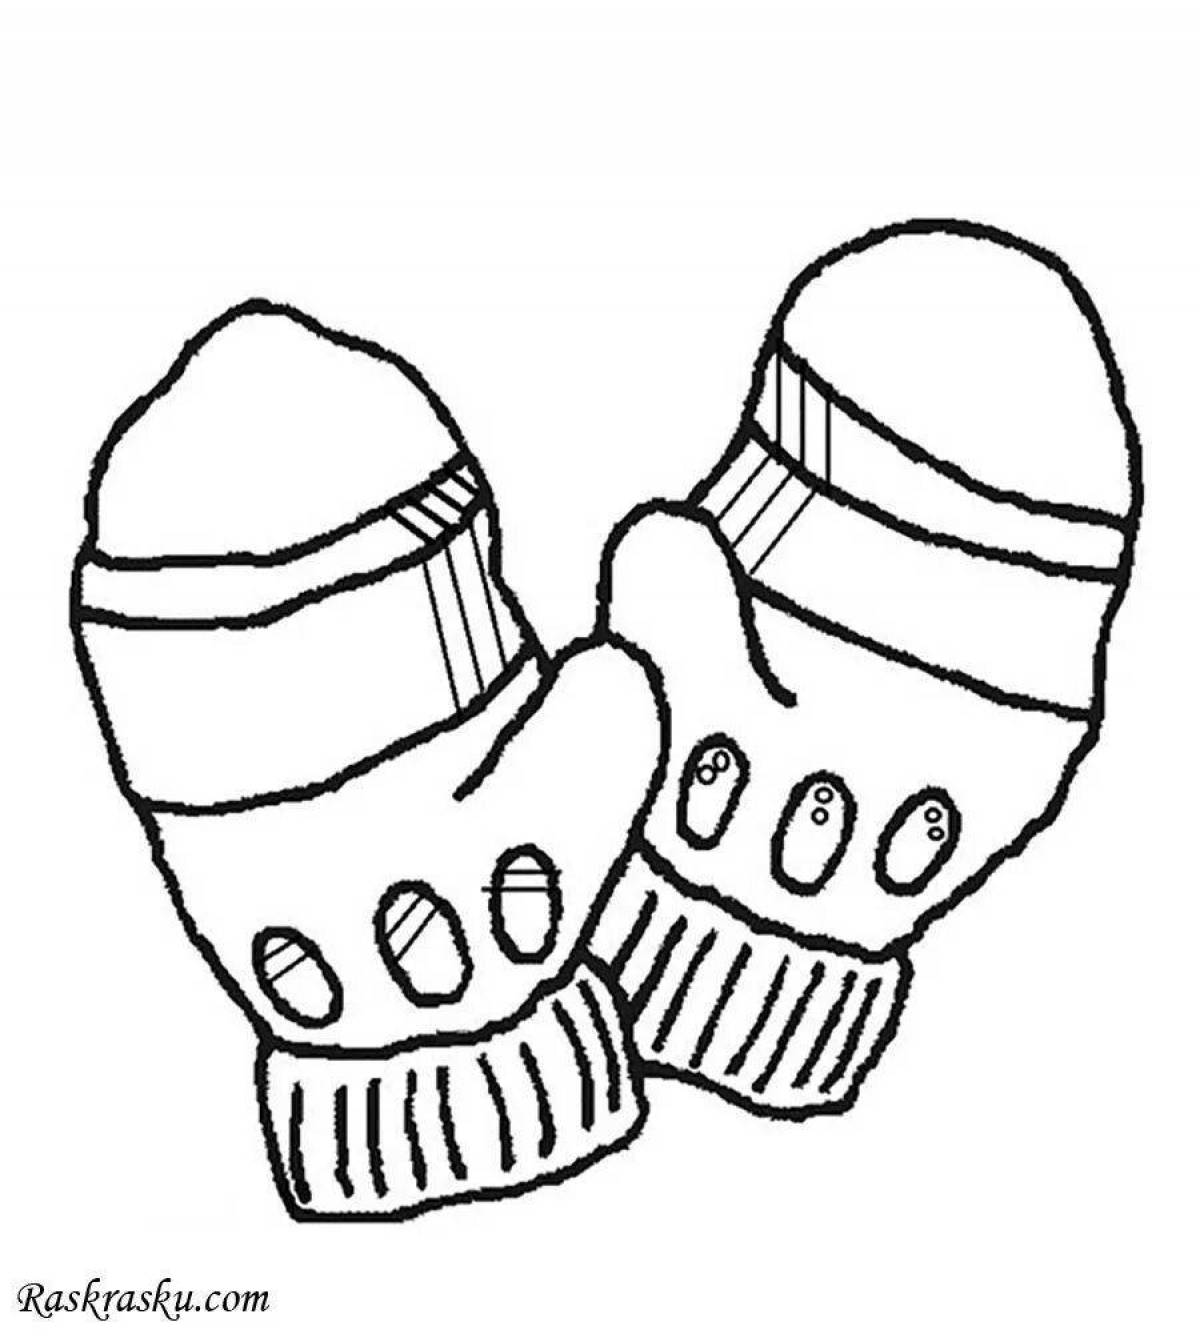 Coloring page playful hat and mittens